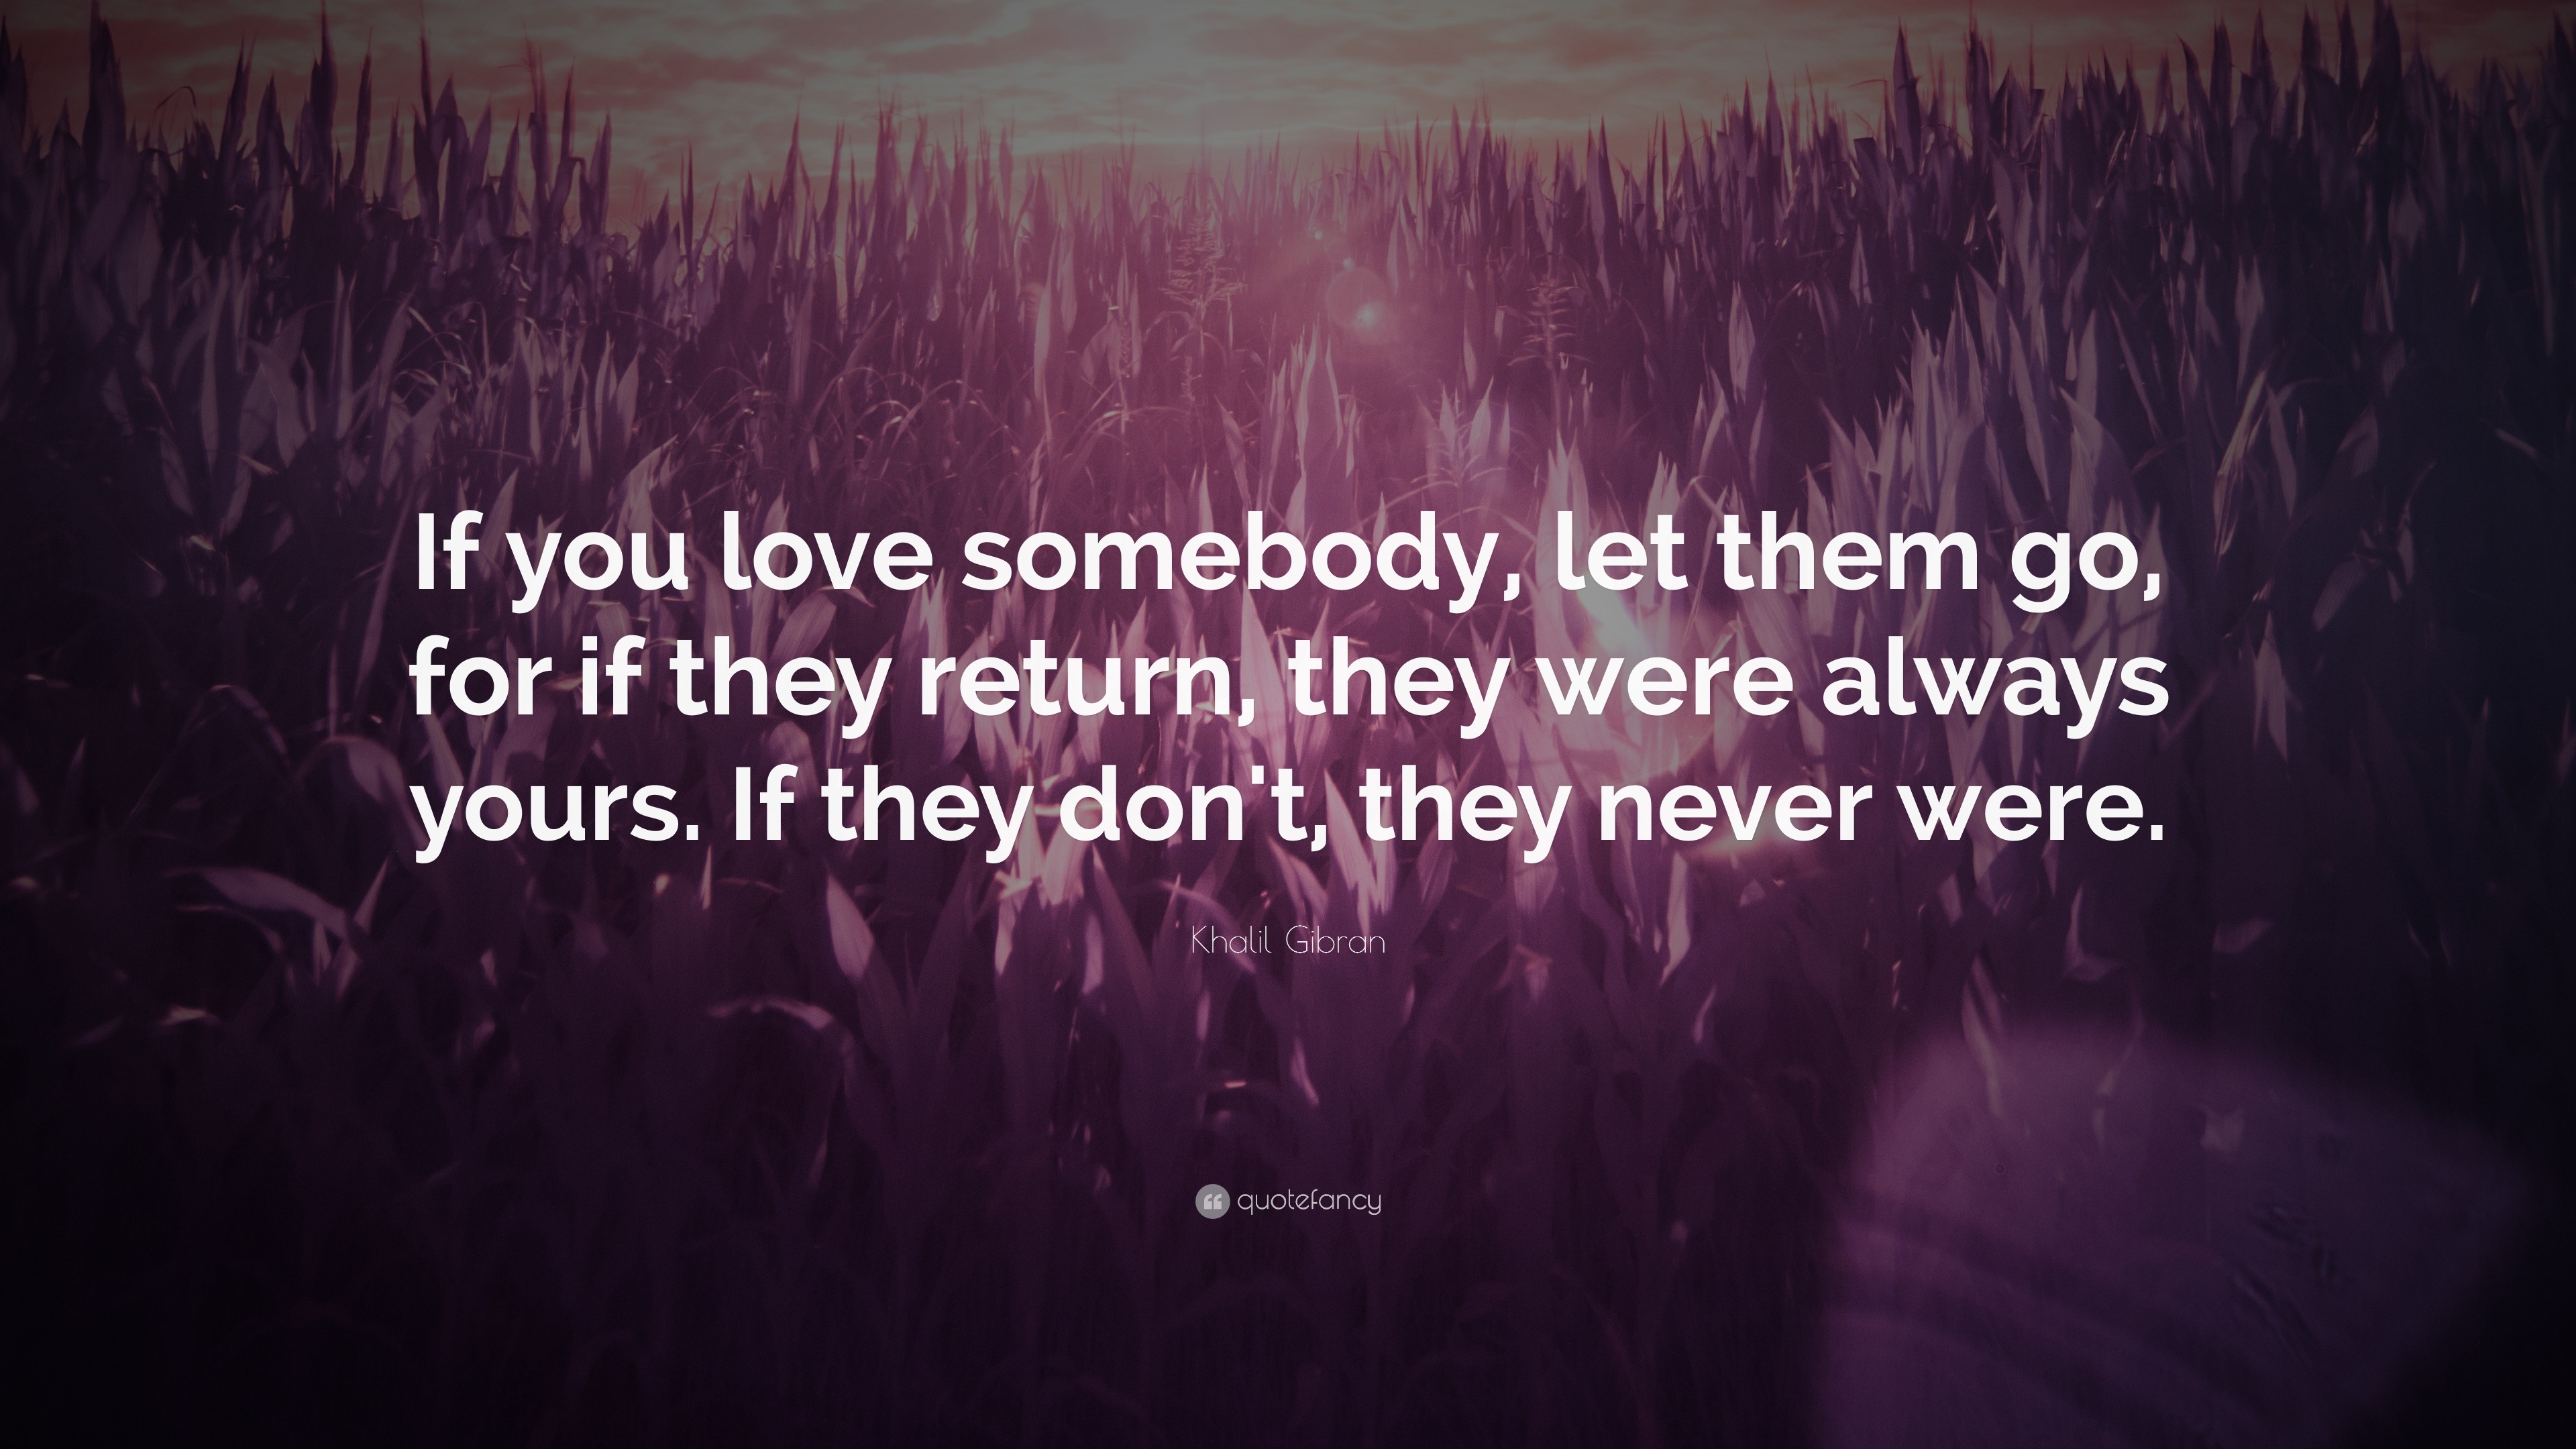 Khalil Gibran Quote “If you love somebody let them go for if